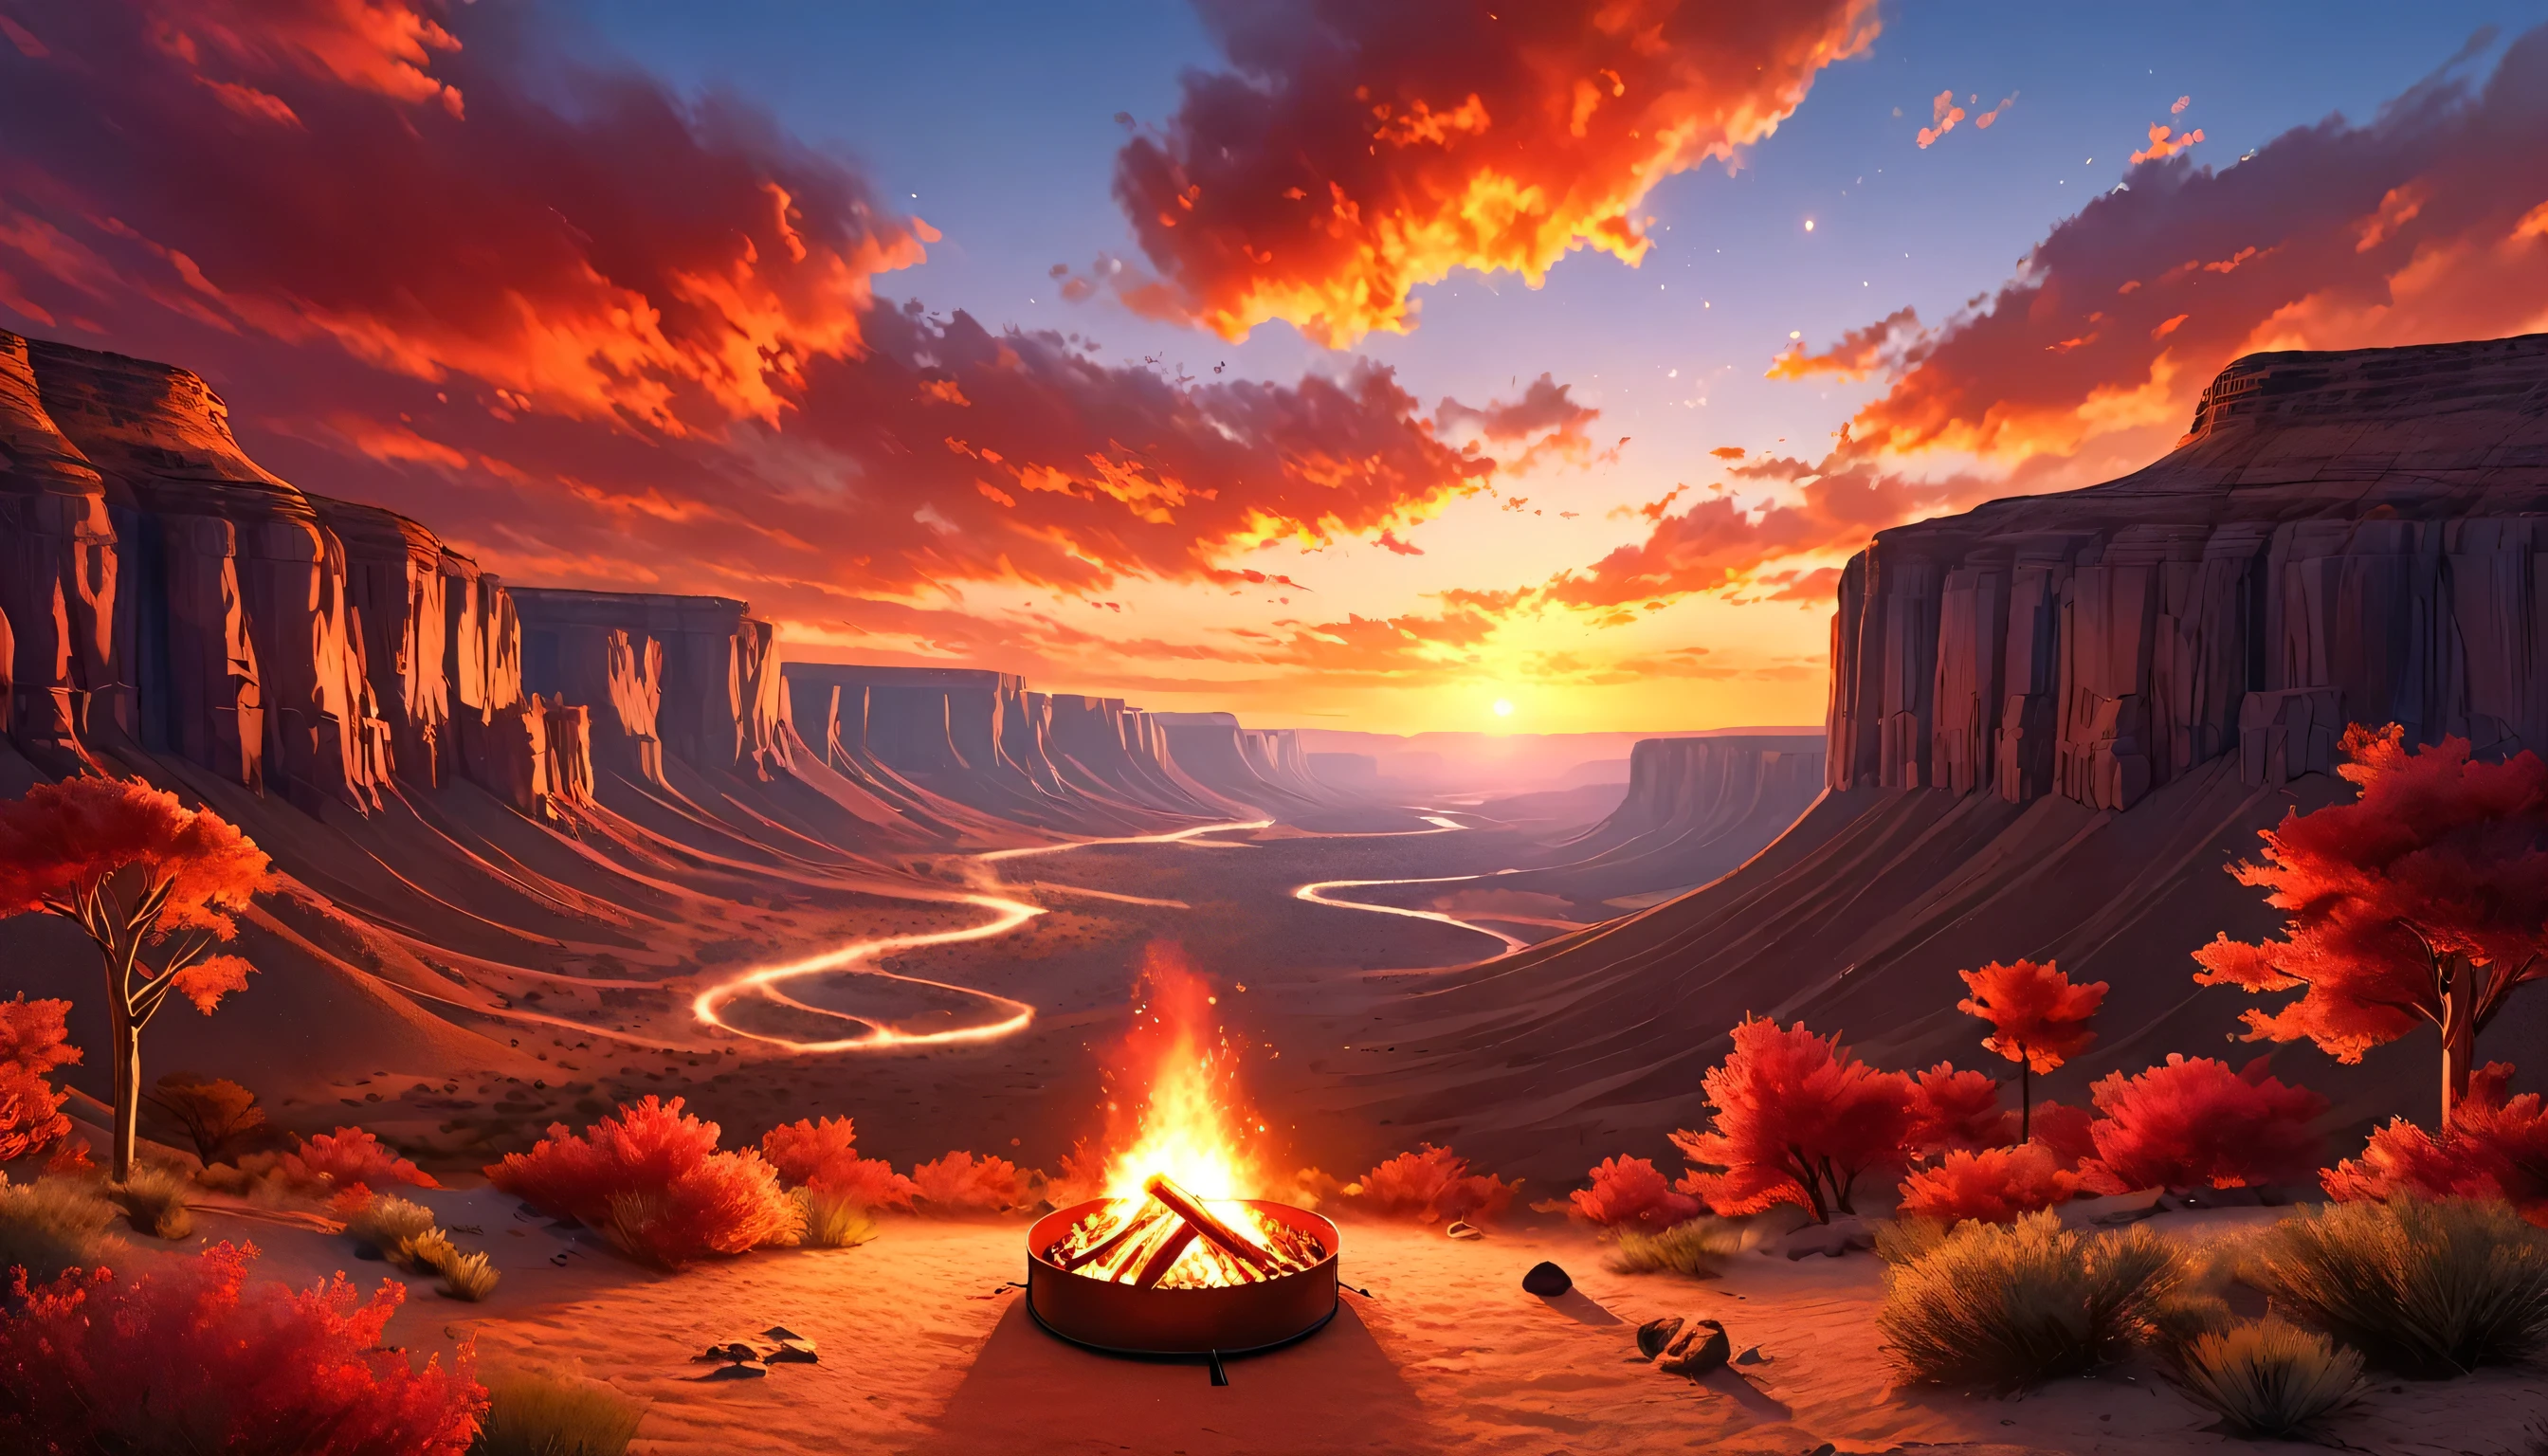 arafed, a picture of a camping (tent: 1.2) and small (campfire: 1,2), on a desert mountaintop, its sunset the sky are in various shades of  (red: 1.1), (orange: 1.1), (azure: 1.1) (purple:1.1) there is smoke rising from the fire camp, there is a magnificent view of the desert canyon and ravines, there is sparce trees on the horizon, it is a time of serenity, peace, and relaxation, best quality, 16K,  photorealism, National Geographic award winning photoshoot, ultra wide shot, RagingNebula, ladyshadow